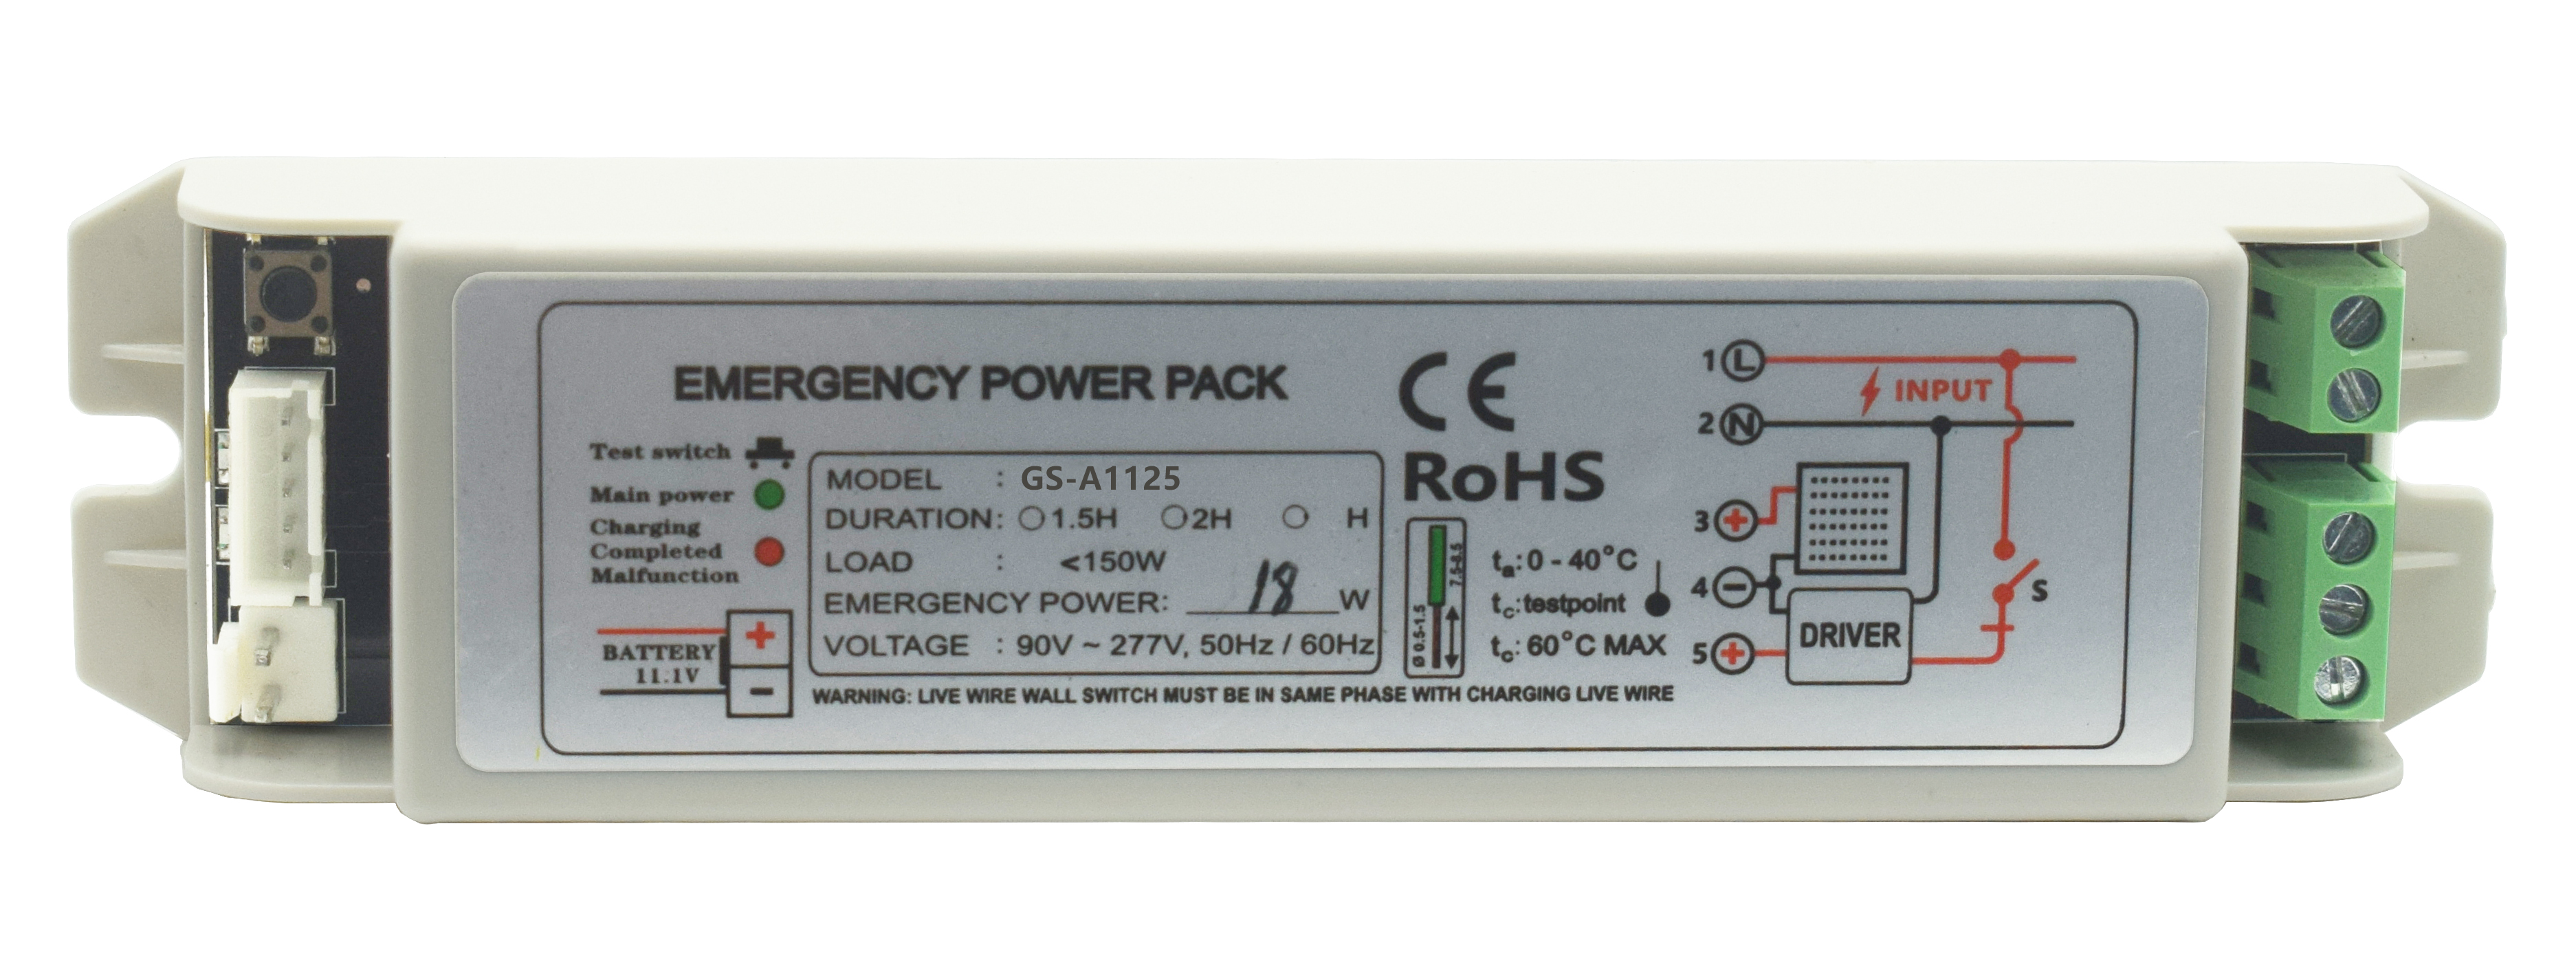 Emergency Power Pack GS-A1125